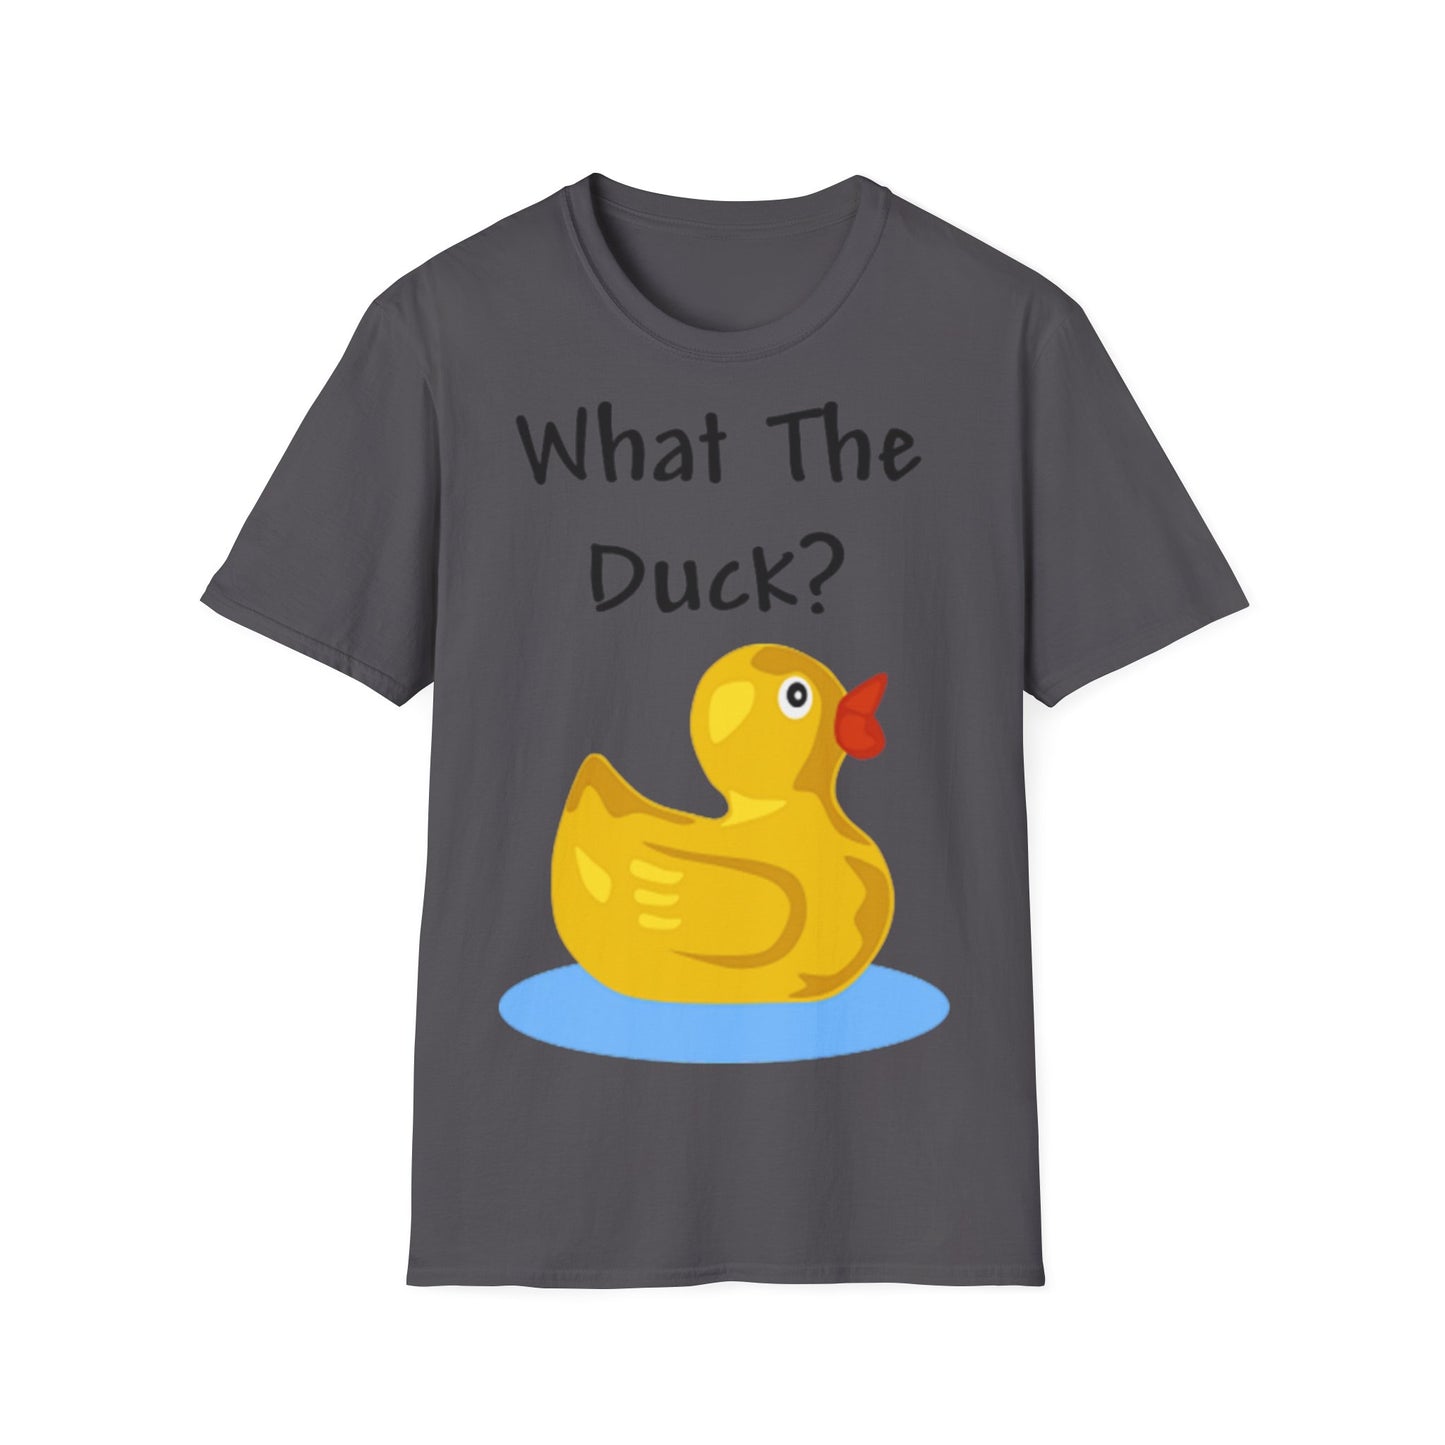 What The Duck Funny Cartoon T-Shirt